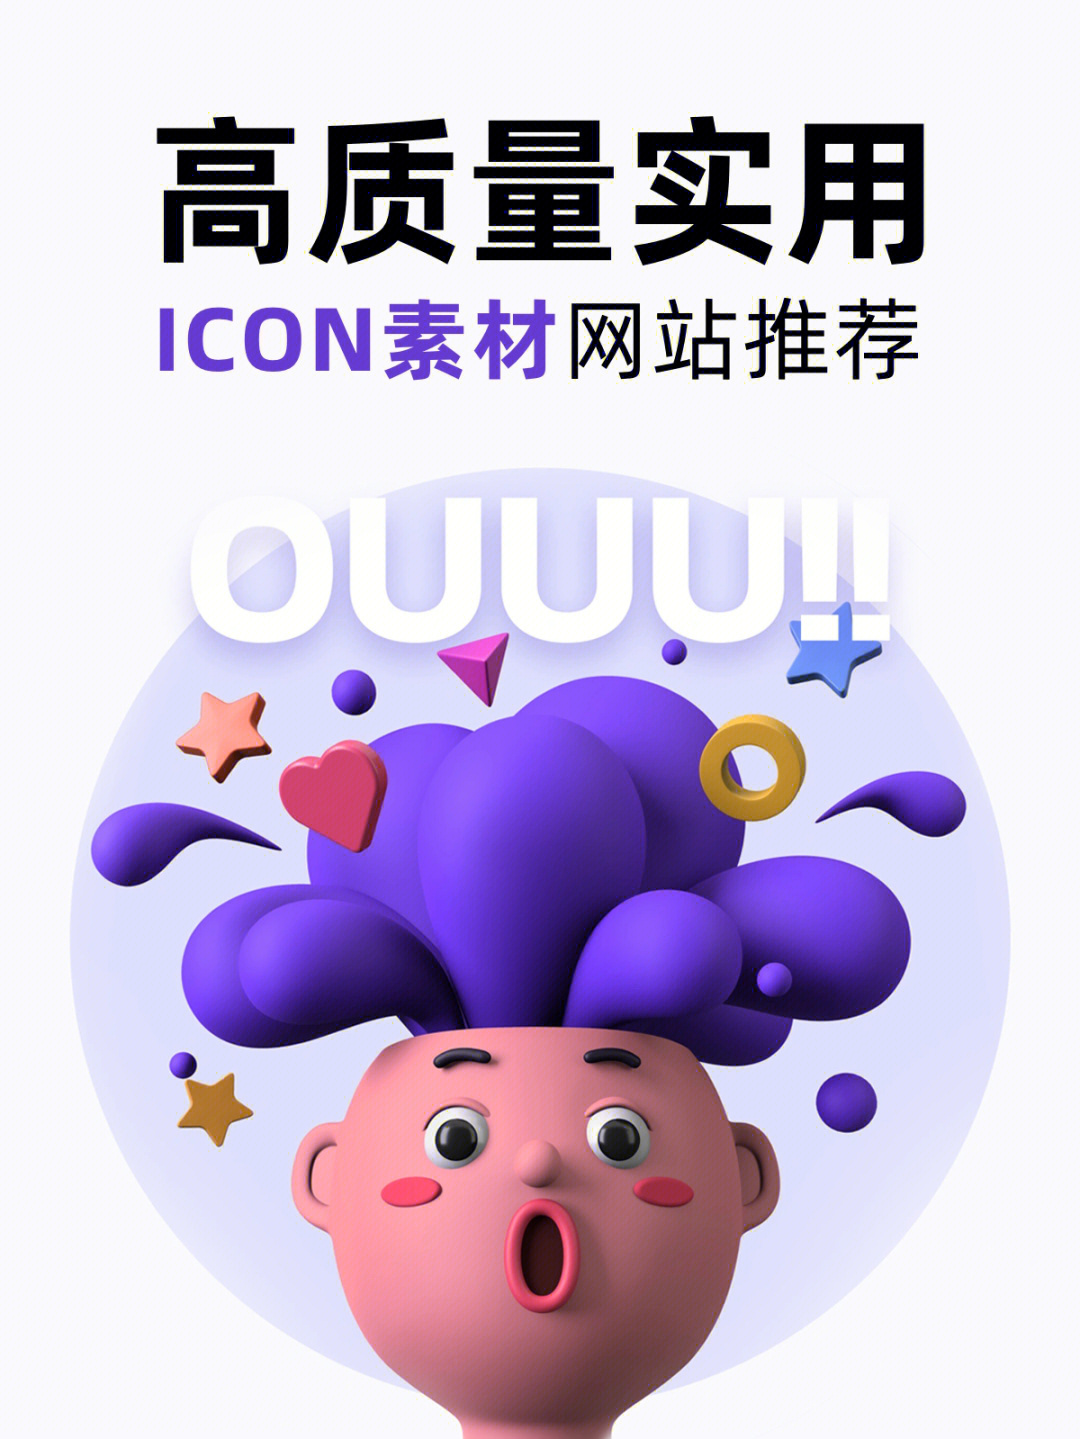 icons8插画素材网站图片